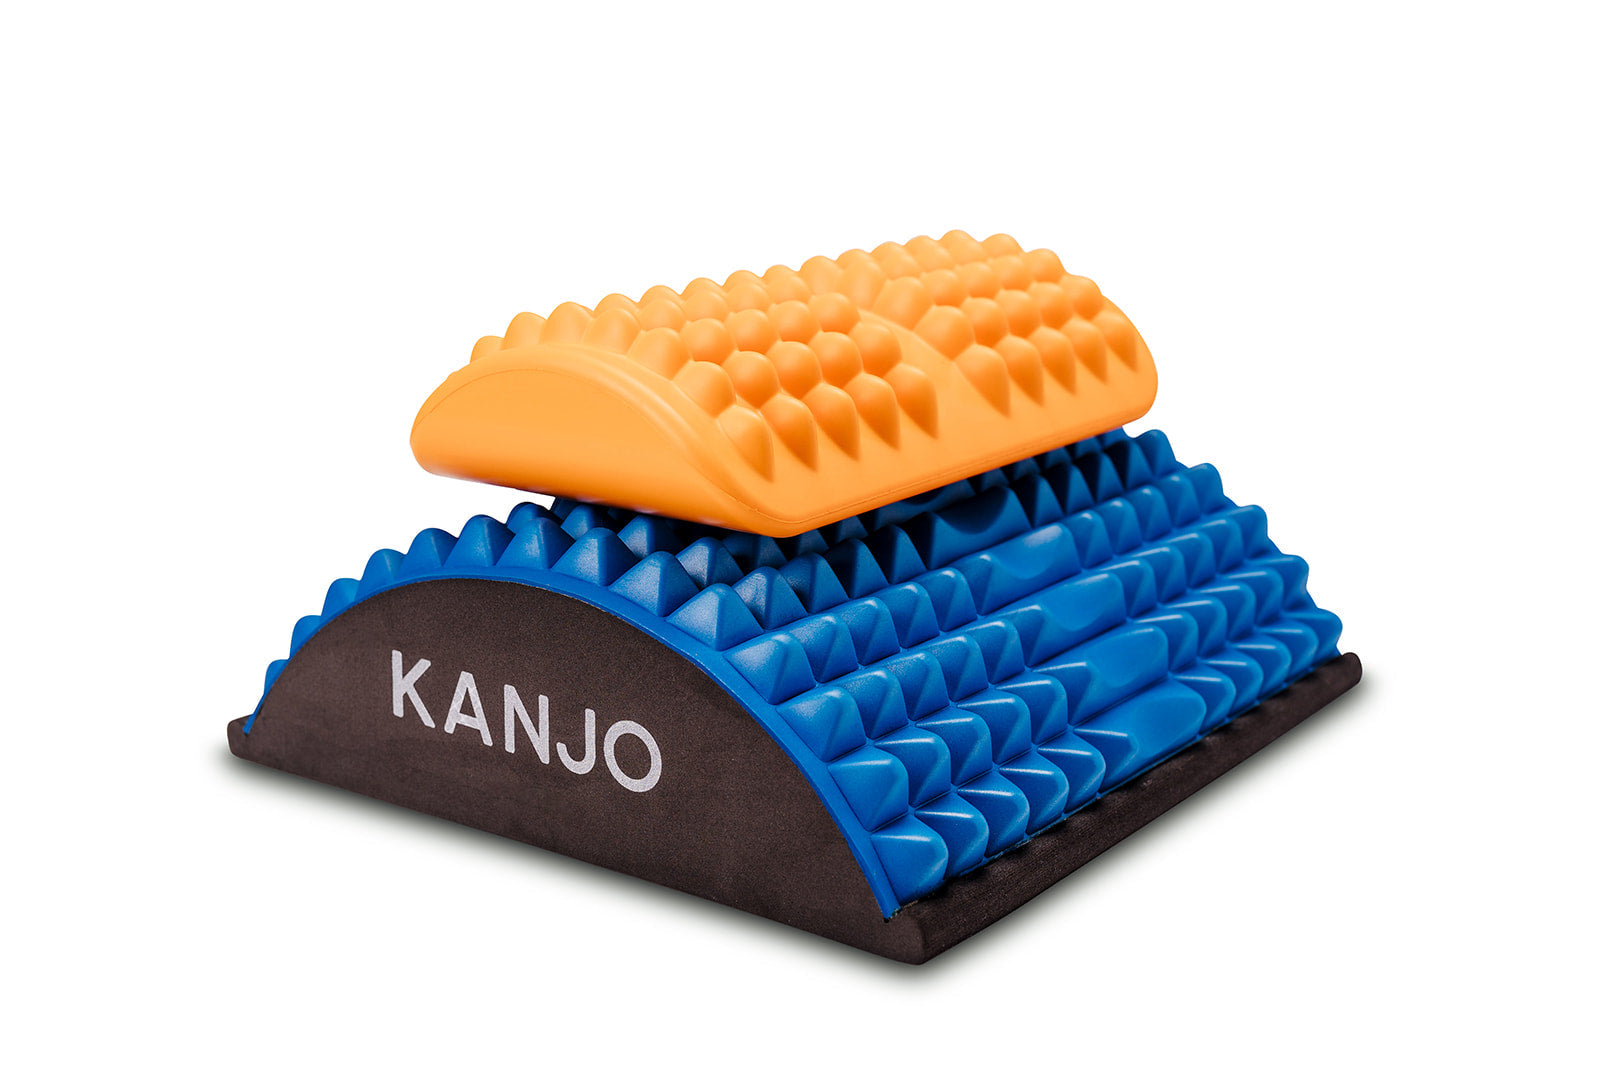 Kanjo FSA HSA Eligible Acupressure Lower Back Pain Relief Cushion